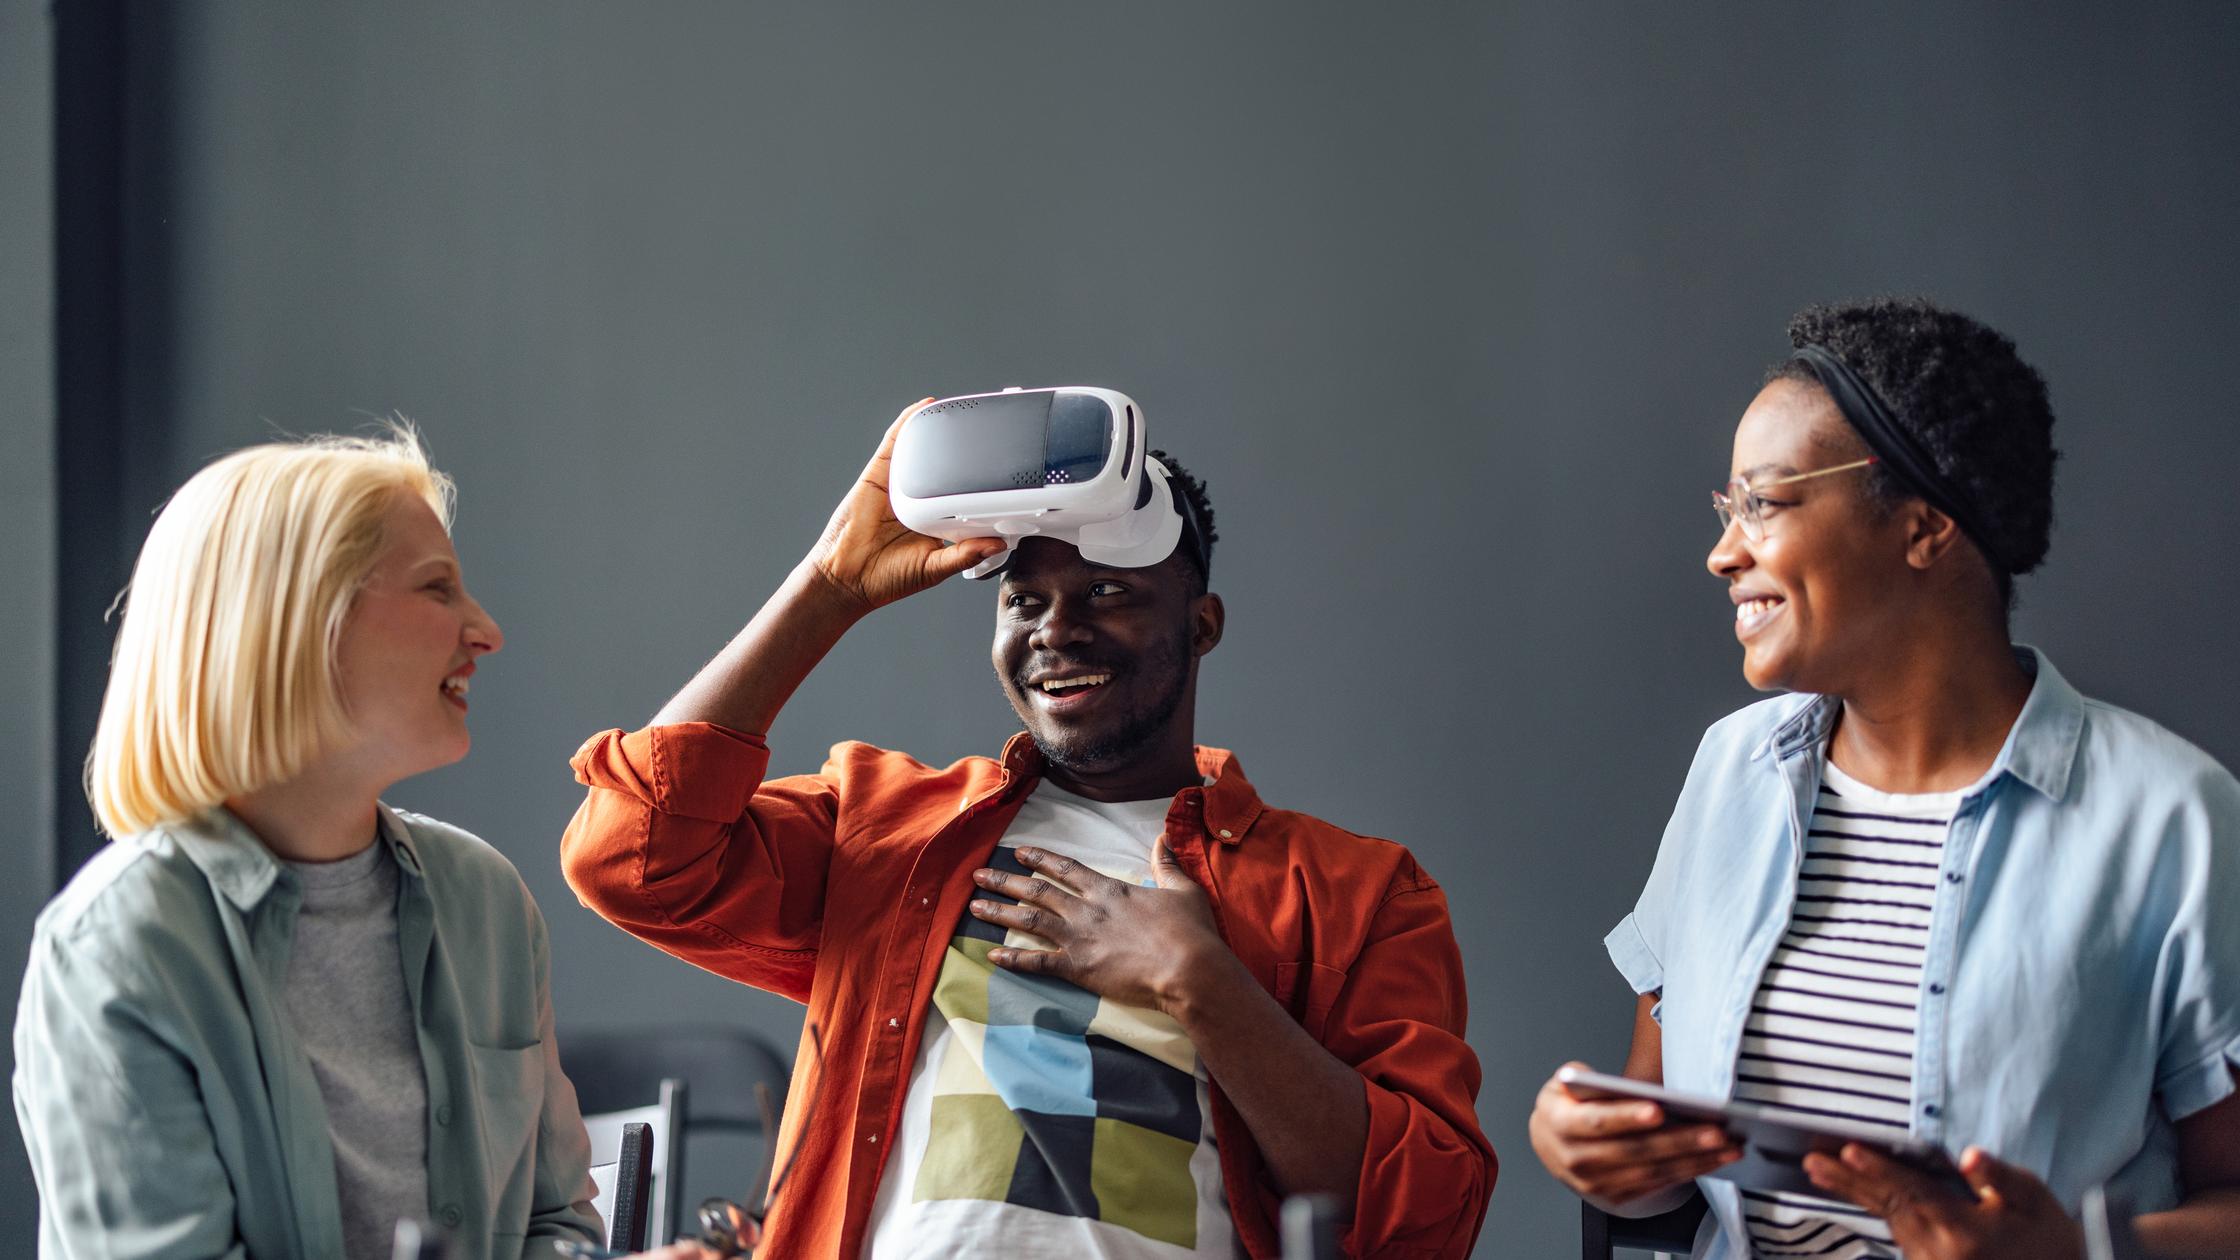 Immersive experiences - Two women smiling while their male friend is taking off virtual reality goggles